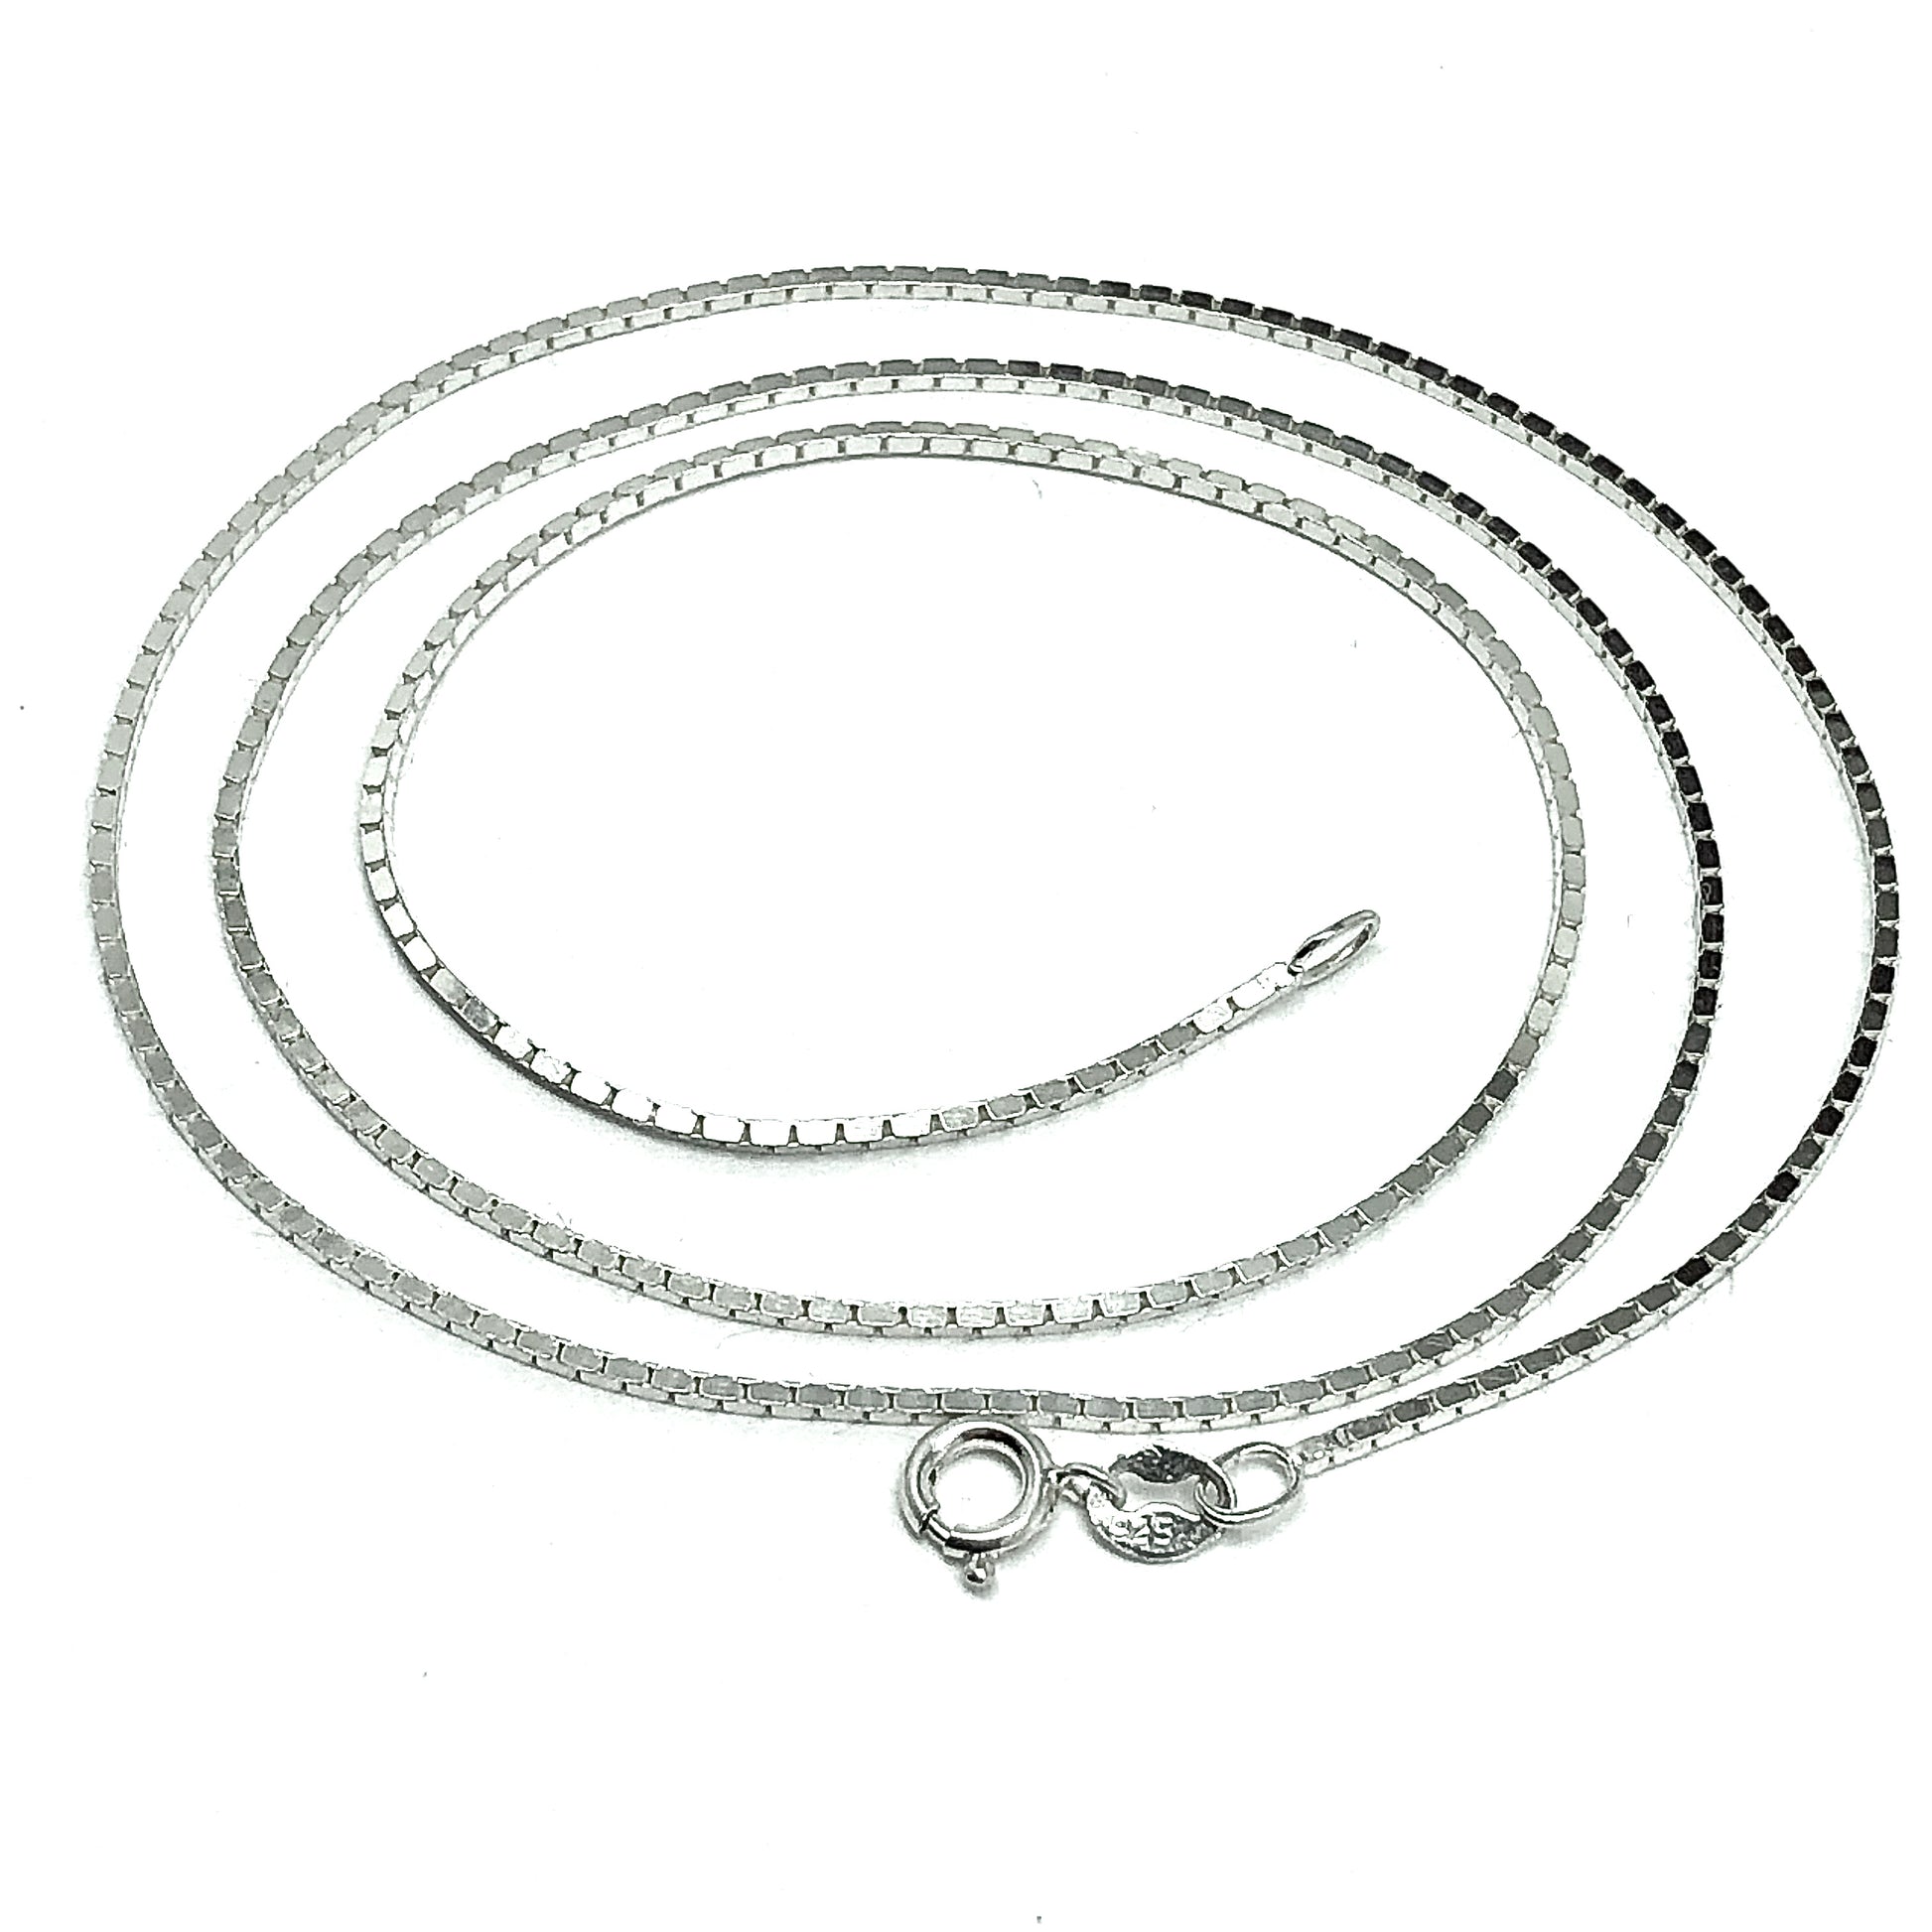 Necklace - 925 Sterling Silver 18in Sleek Square Link Thin Necklace - 1mm Box Chain Necklace